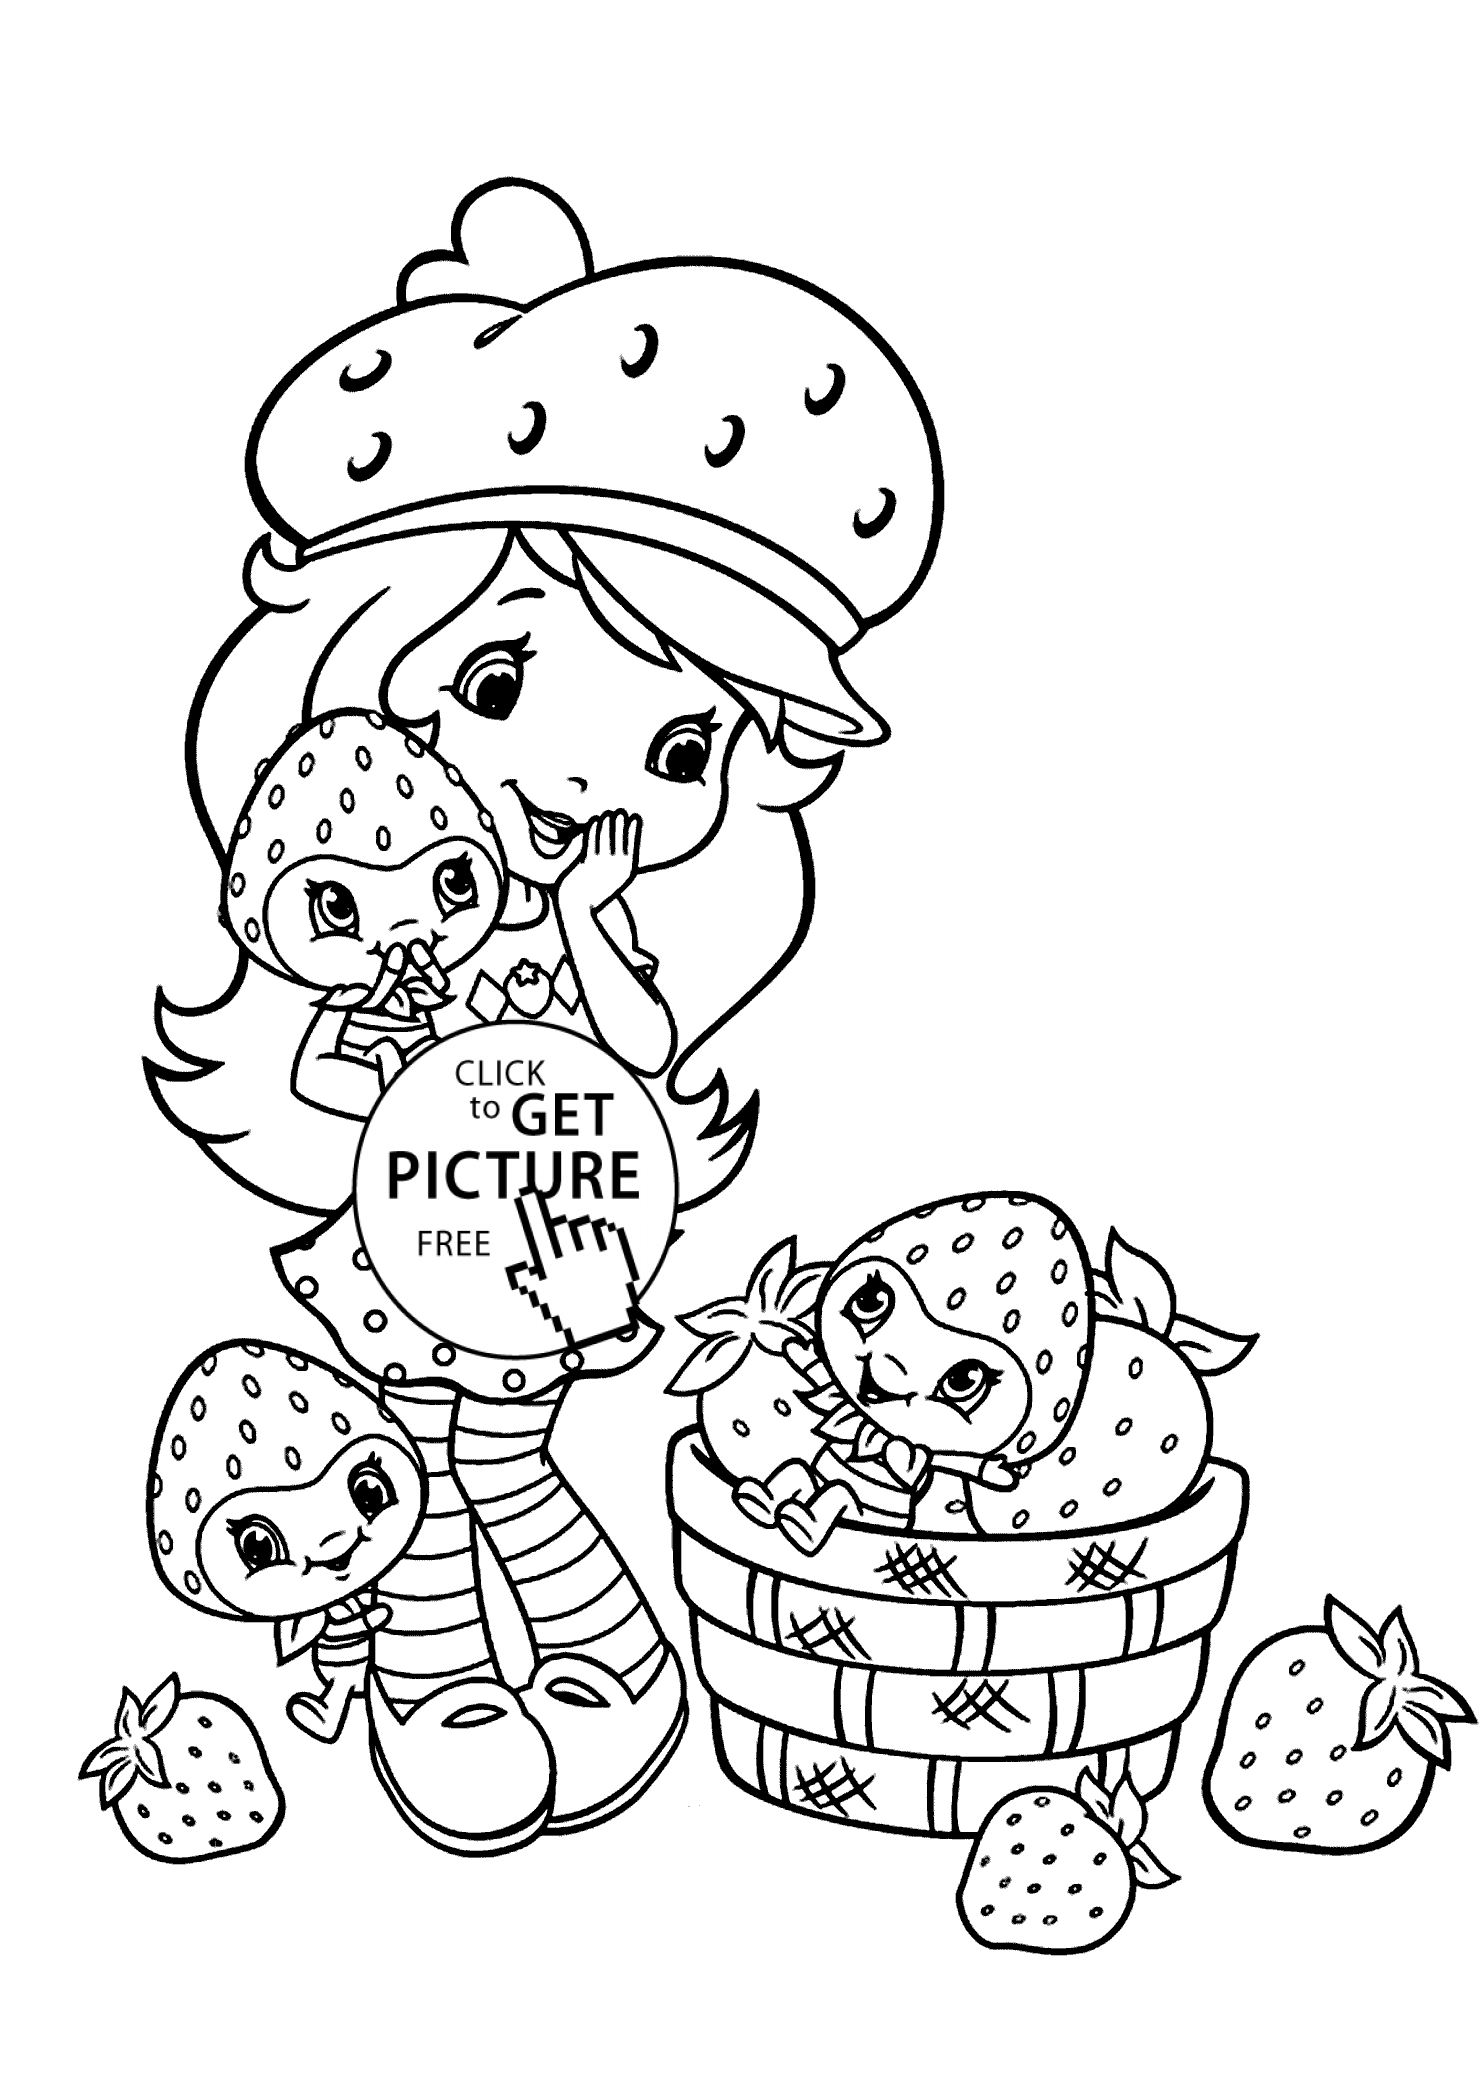 strawberry shortcake and friends coloring pages purple pieman strawberry shortcake coloring page strawberry coloring friends pages and shortcake 